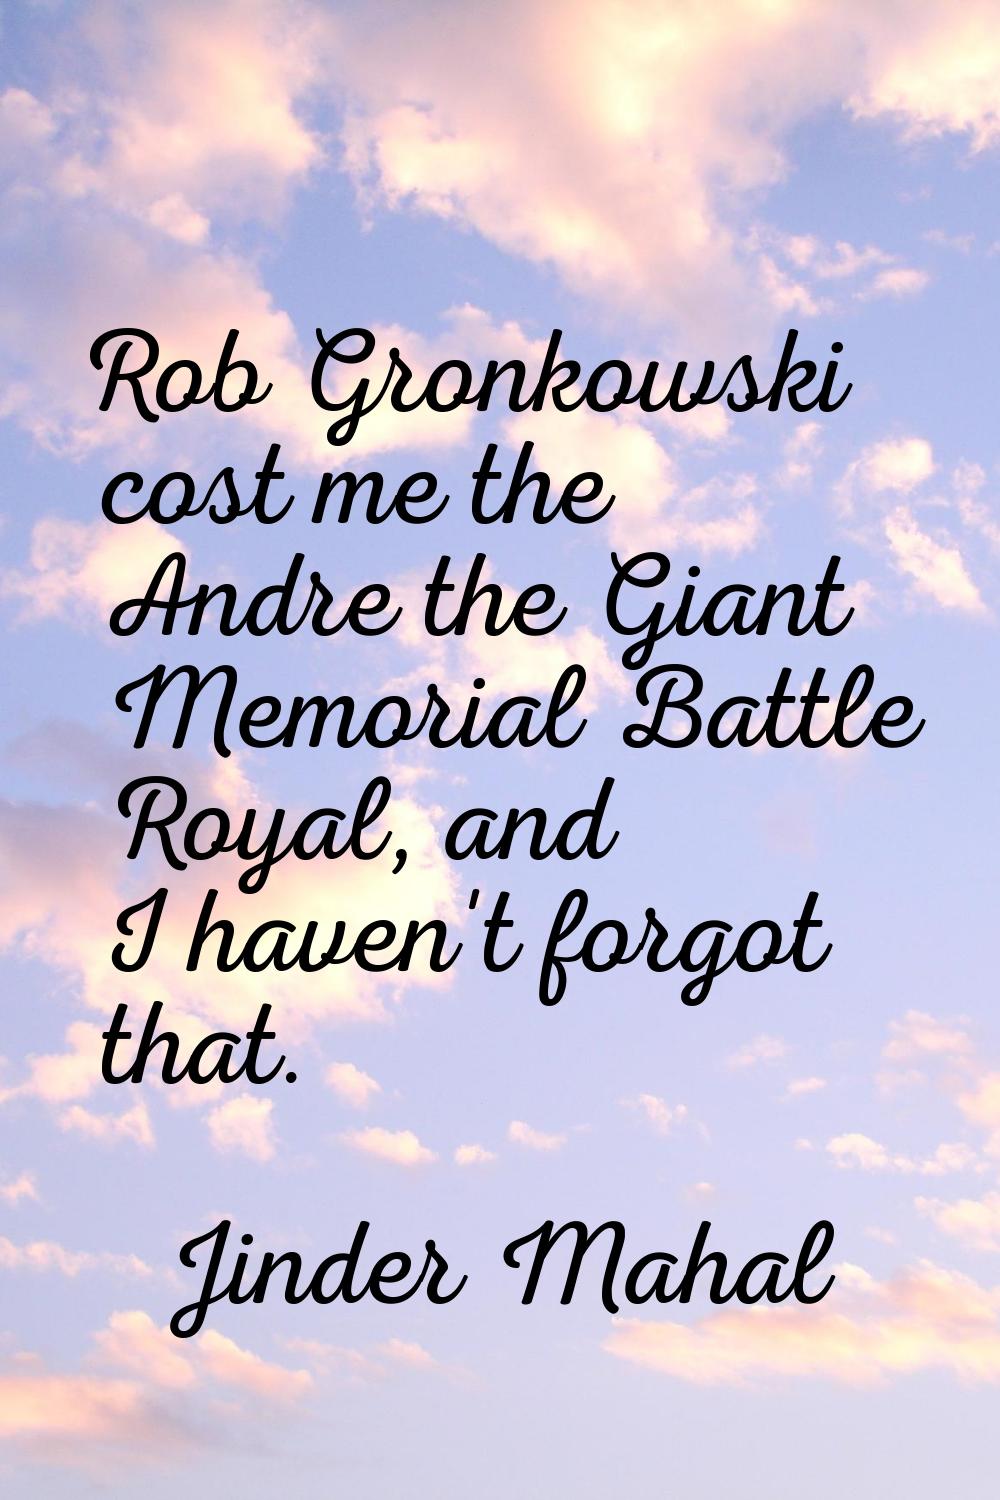 Rob Gronkowski cost me the Andre the Giant Memorial Battle Royal, and I haven't forgot that.